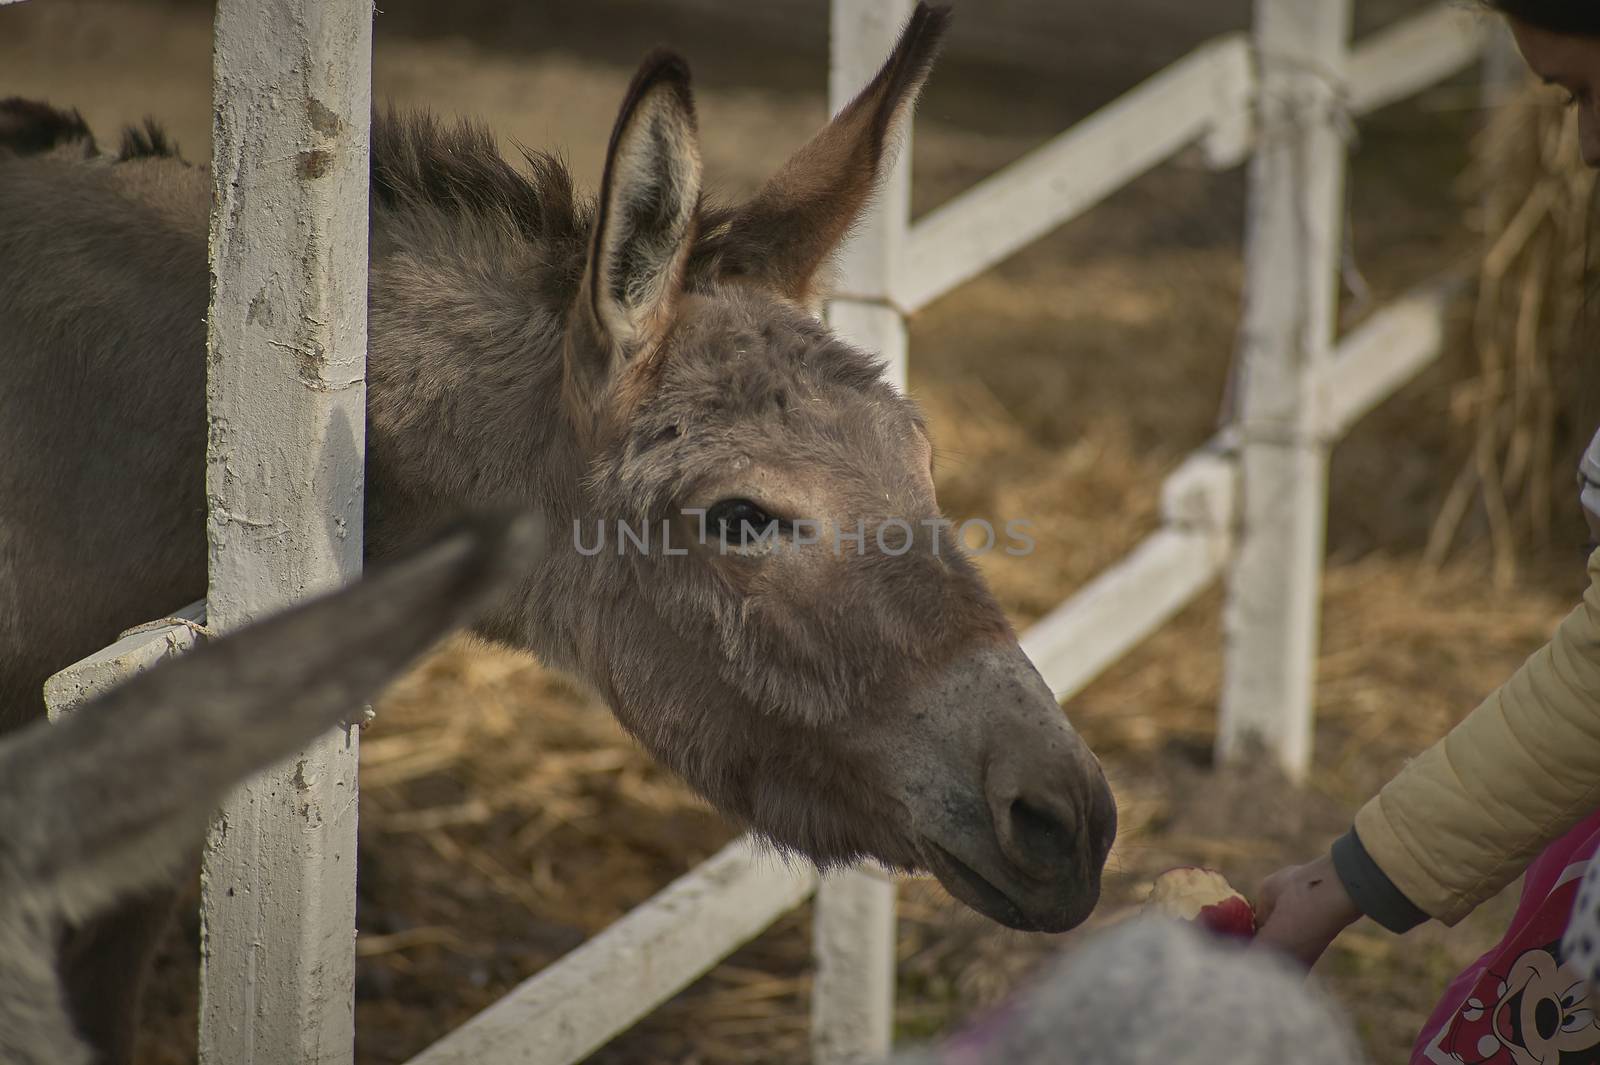 Hand of a human being eating to a young donkey in a fence. Typical scene of a didactic farm or a zoo.